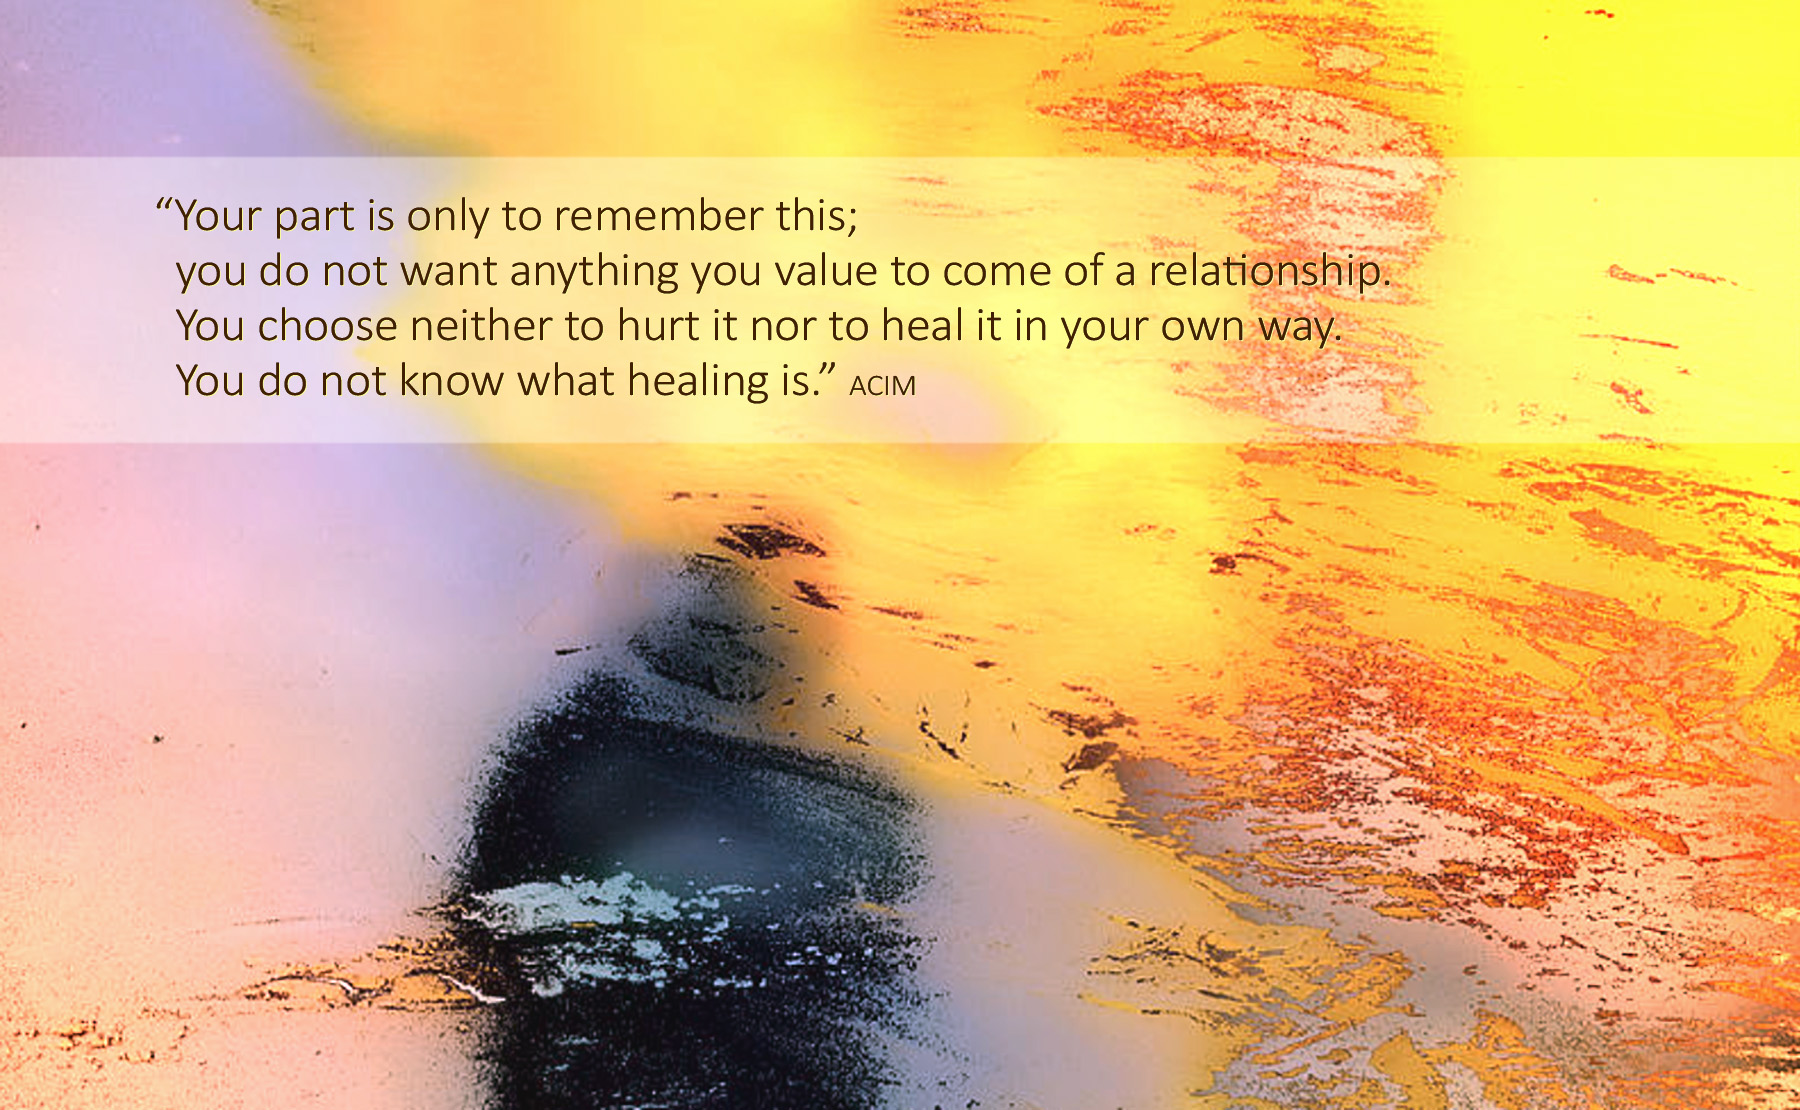 Your part is only to remember this; you do not want anything you value to come of a relationship. You choose neither to hurt it nor to heal it in your own way. You do not know what healing is.